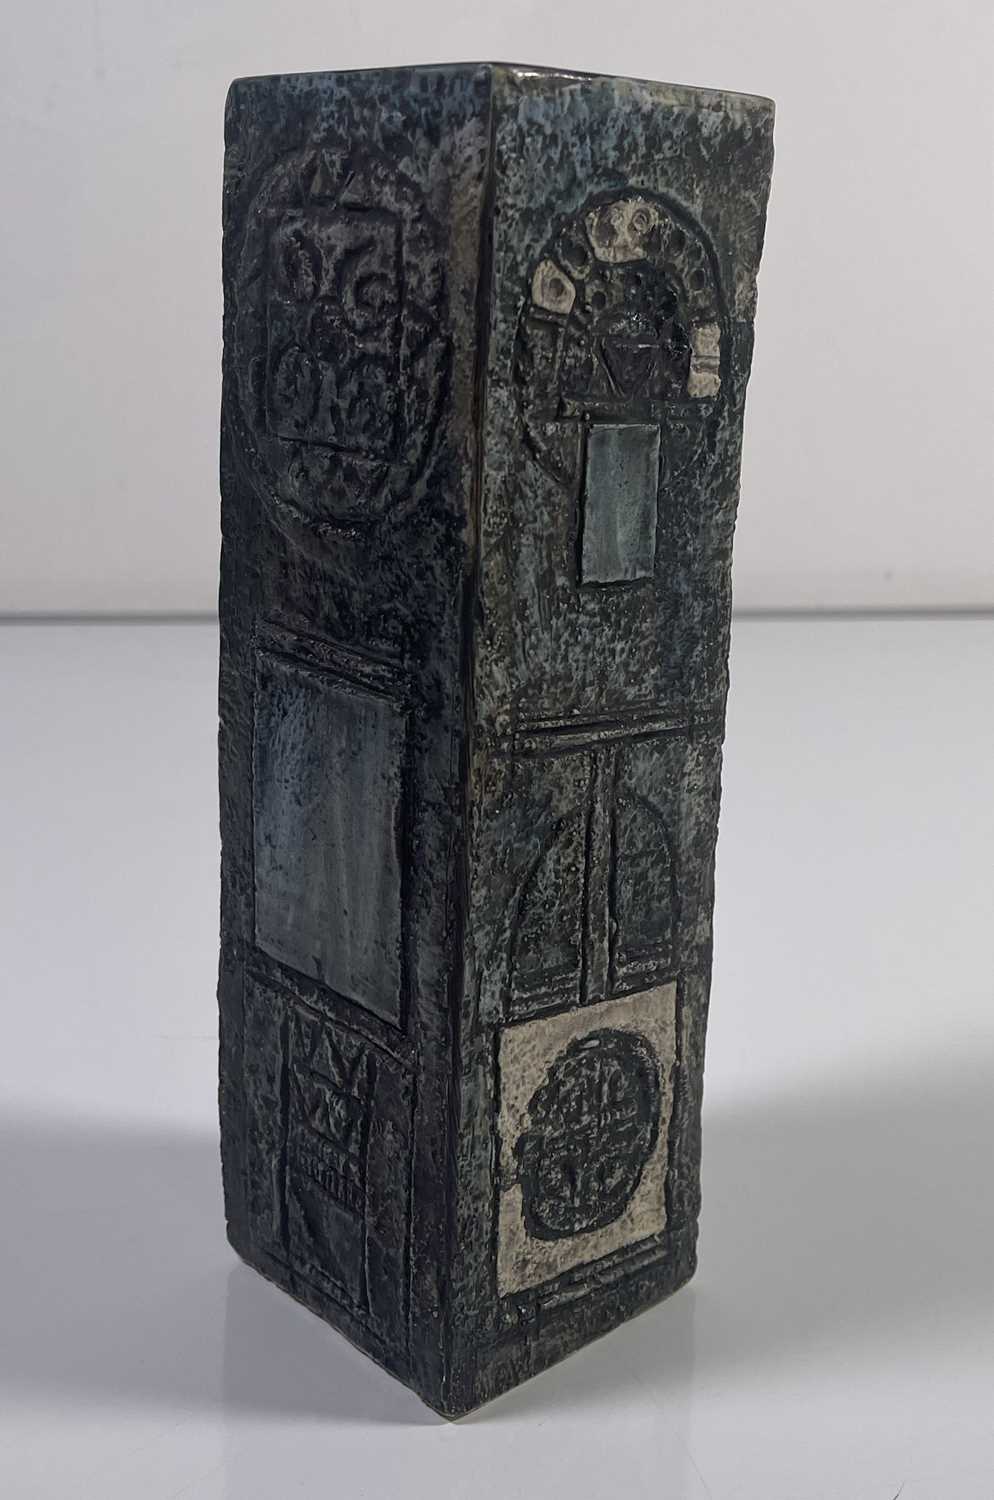 TROIKA - RECTANGULAR VASE BY ANNE LEWIS. - Image 2 of 3